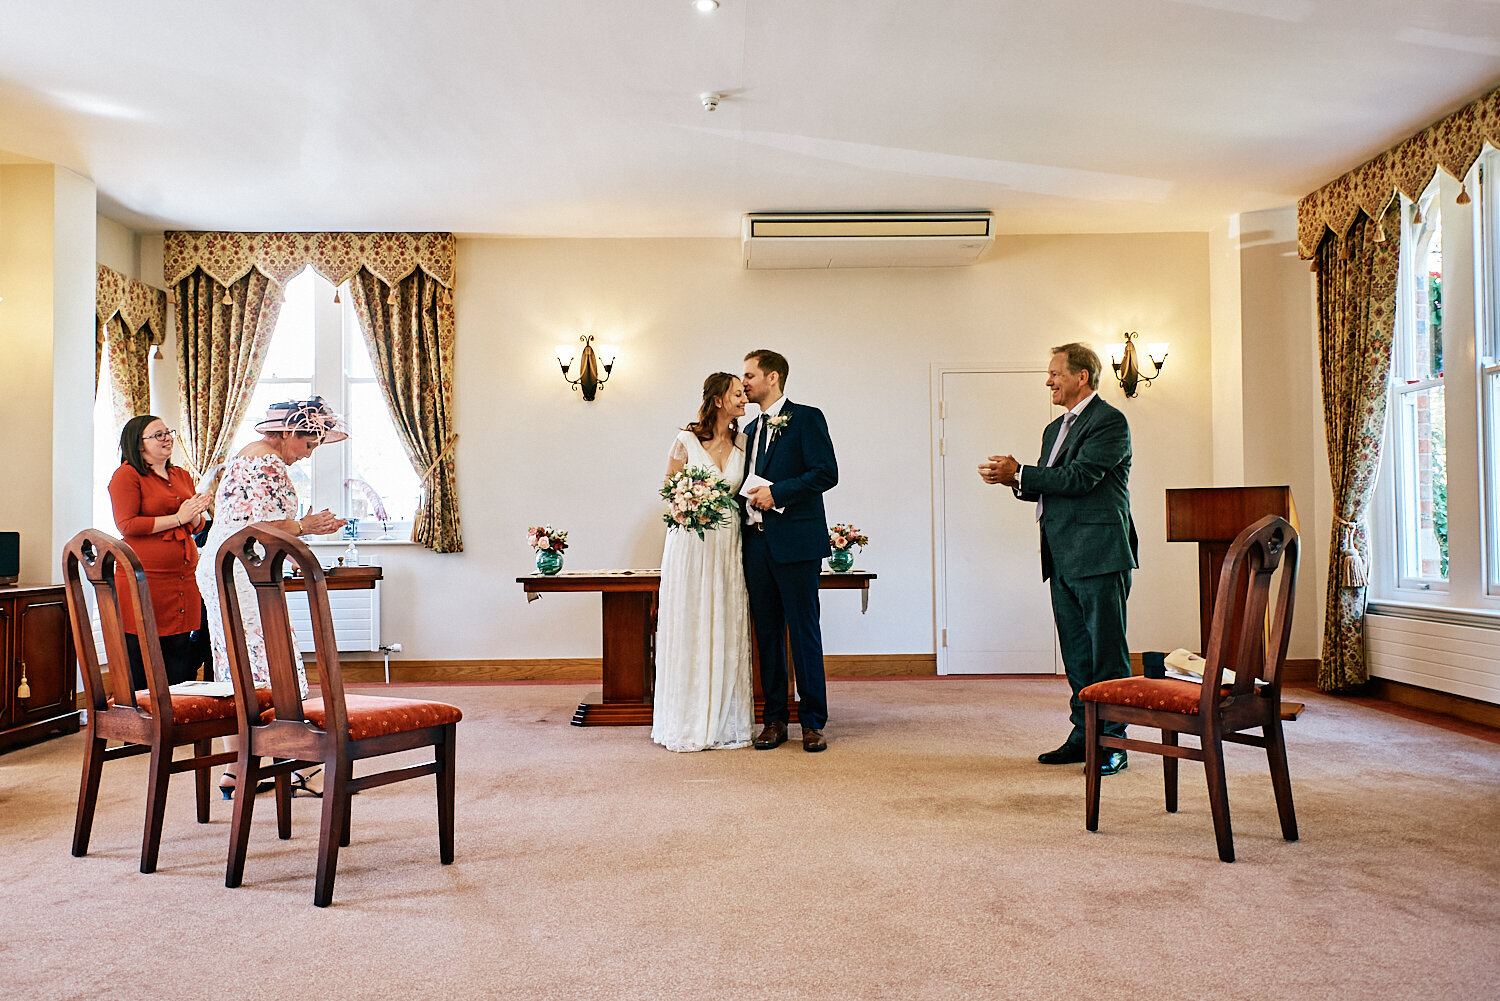 SMALL-wedding-photography-st-albans-registry-office-pike-photography_166.jpg